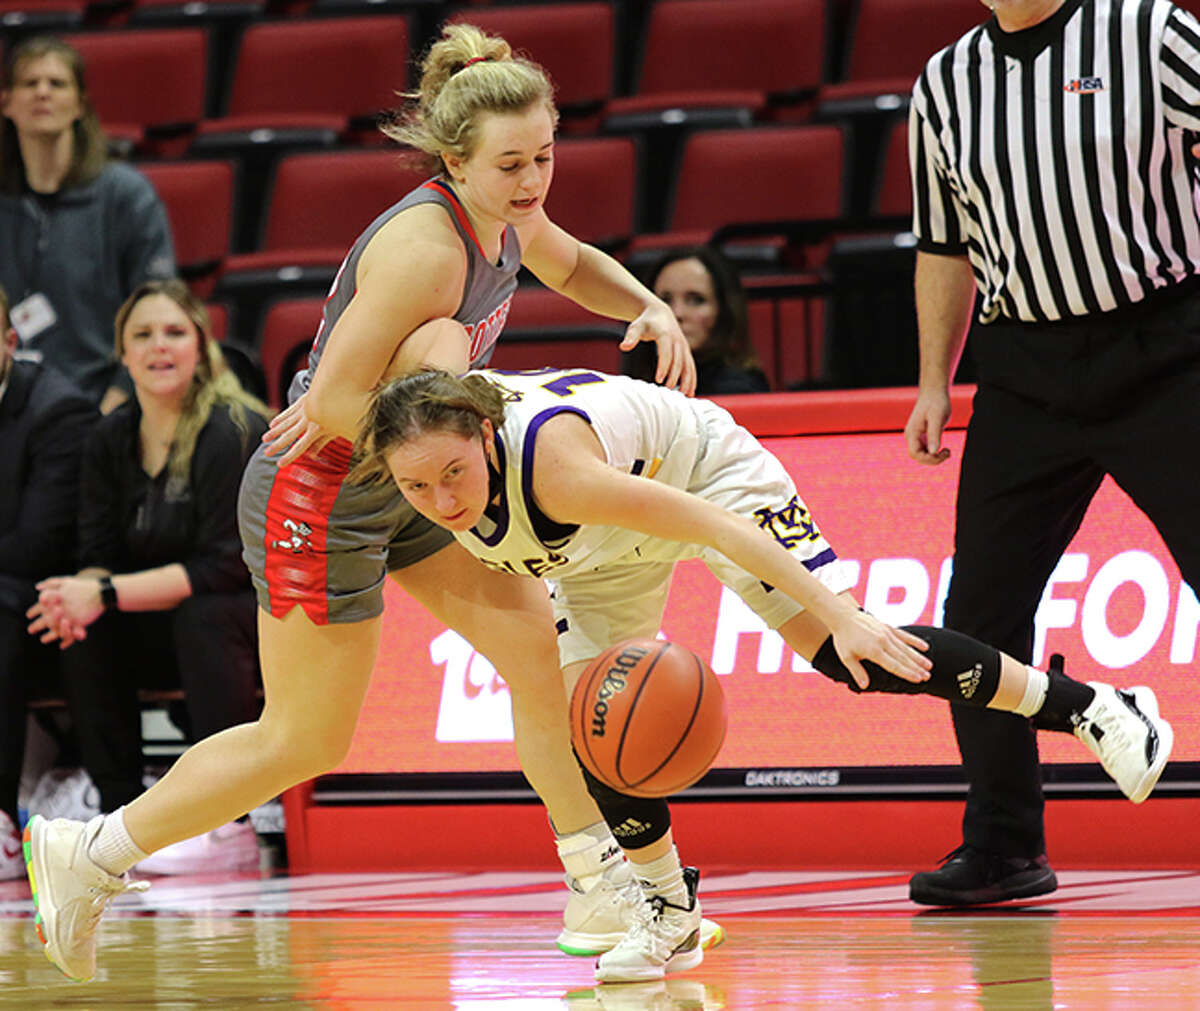 CM's Hannah Meiser (right) is called for a foul while going for a steal against's Morton's Tatym Lamprecht in the second half Friday night at the Class 3A state tournament at Redbird Arena in Normal.